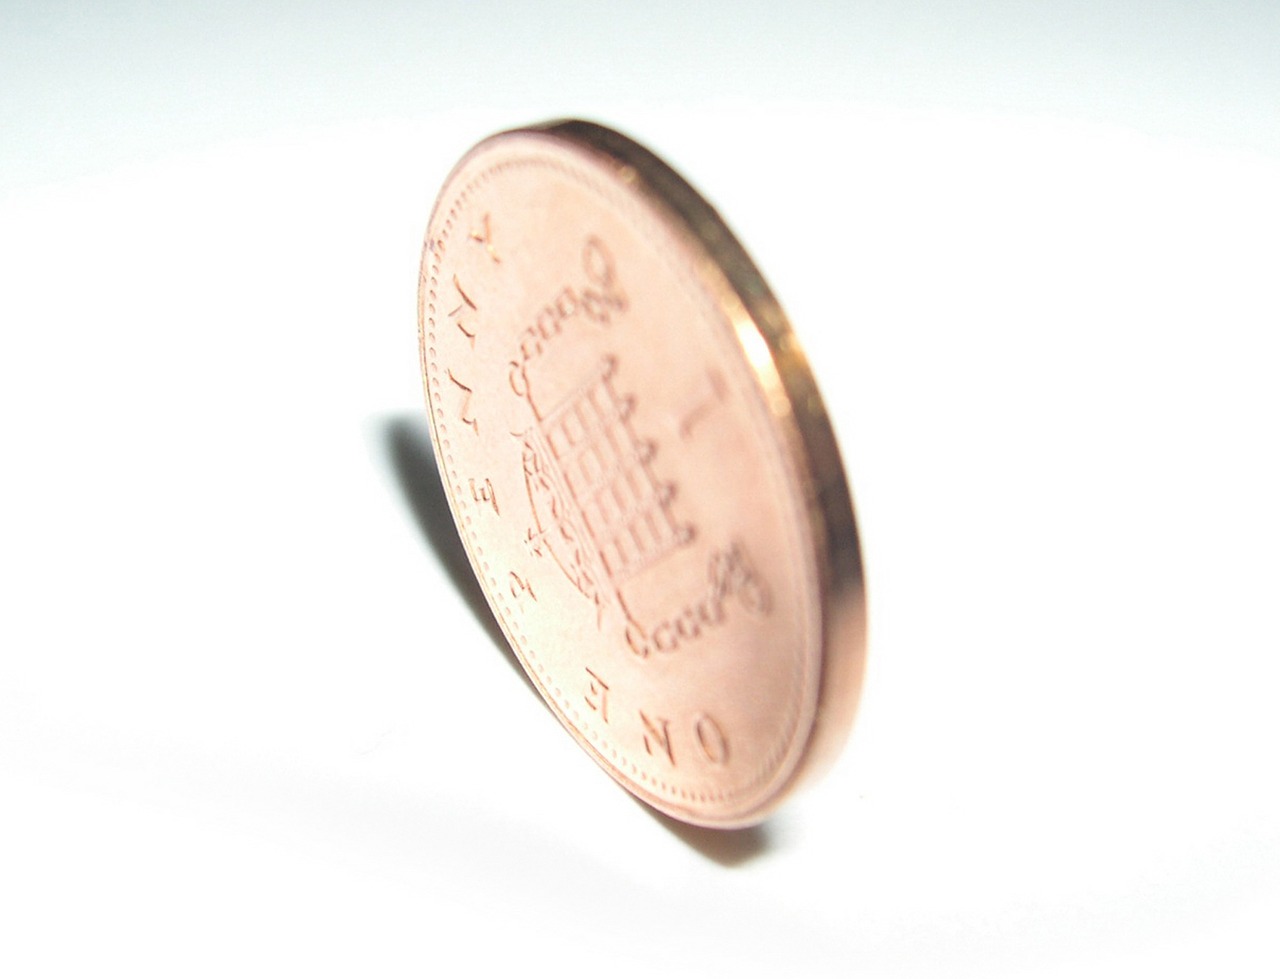 penny british penny coin free photo